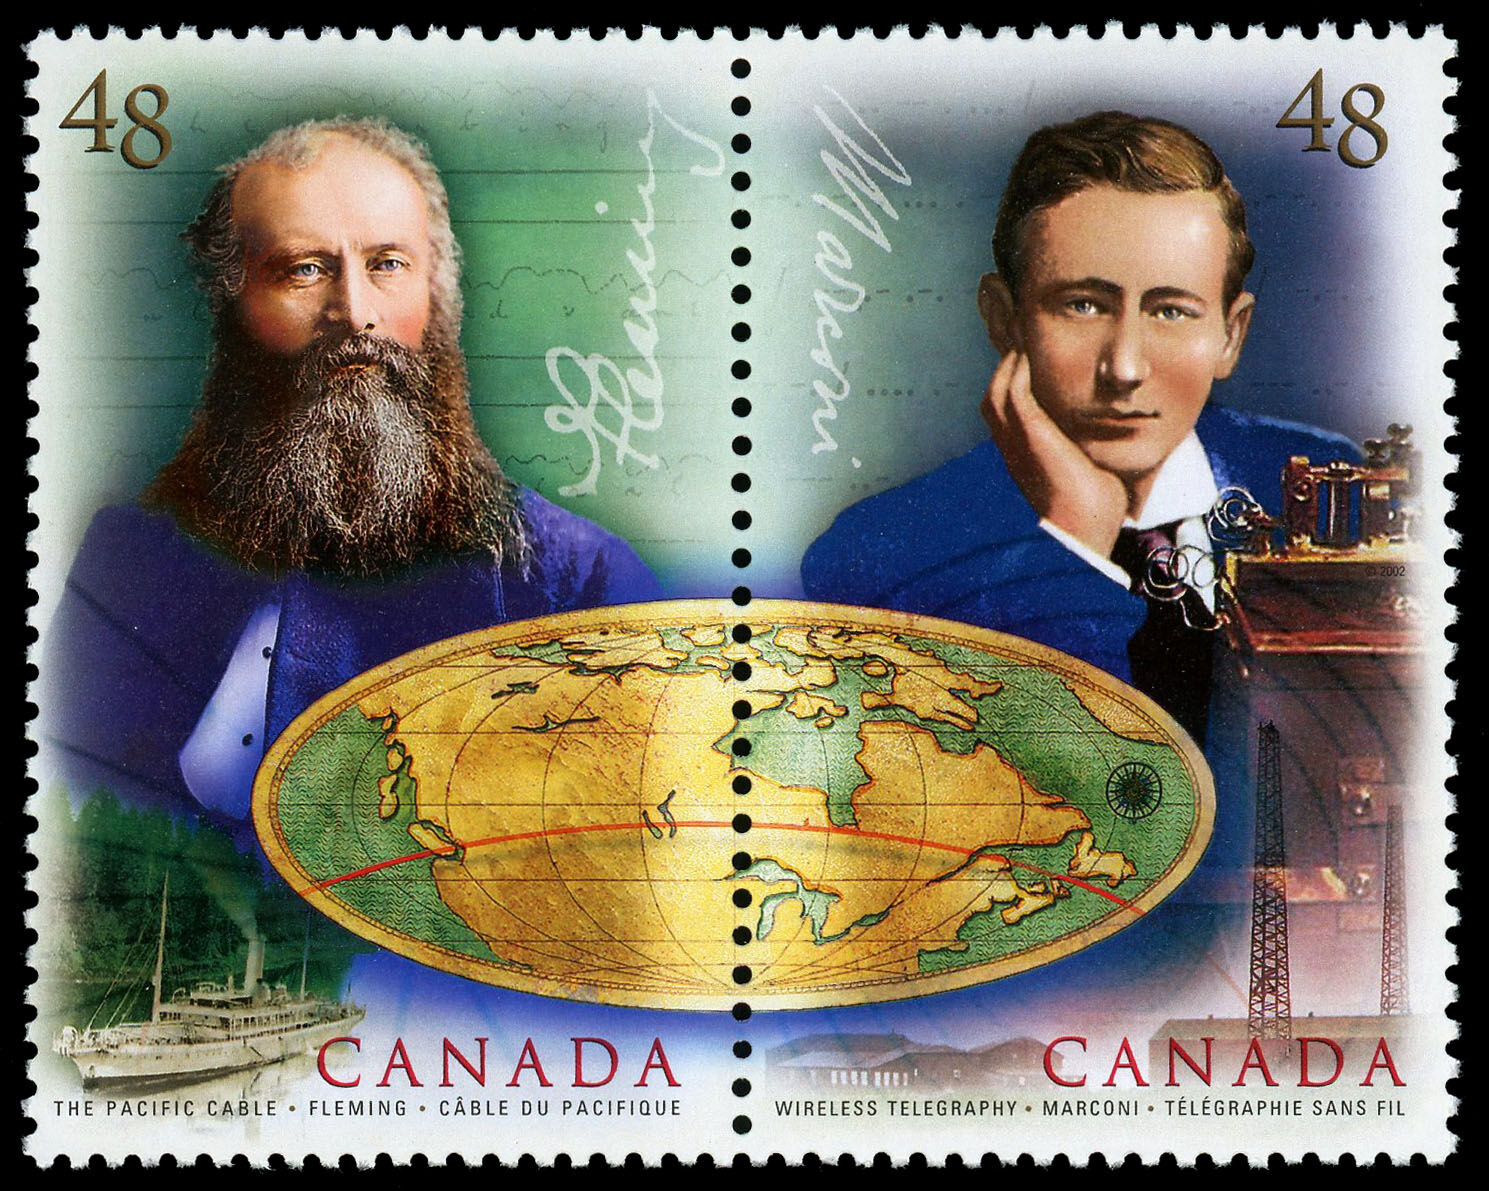 canada-stamp-1964a-communications-technology-2002.jpg